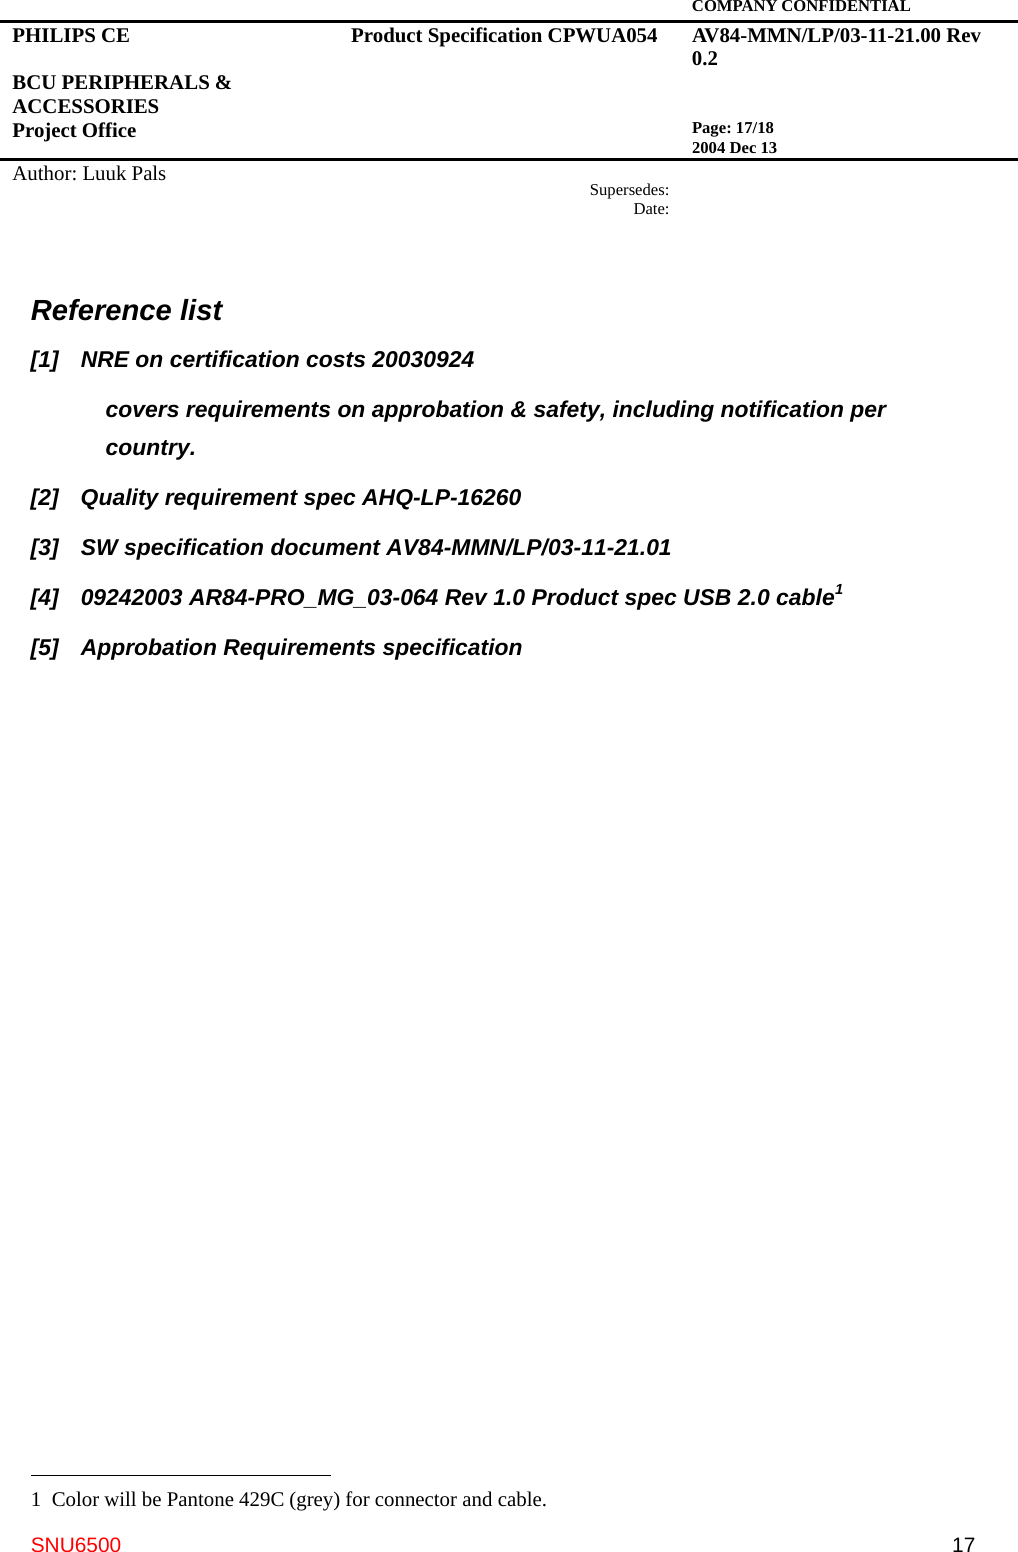   COMPANY CONFIDENTIAL PHILIPS CE  BCU PERIPHERALS &amp; ACCESSORIES Project Office Product Specification CPWUA054  AV84-MMN/LP/03-11-21.00 Rev 0.2   Page: 17/18 2004 Dec 13   Author: Luuk Pals  Supersedes:Date:      SNU6500  17Reference list [1]  NRE on certification costs 20030924 covers requirements on approbation &amp; safety, including notification per country. [2]  Quality requirement spec AHQ-LP-16260 [3]  SW specification document AV84-MMN/LP/03-11-21.01 [4]  09242003 AR84-PRO_MG_03-064 Rev 1.0 Product spec USB 2.0 cable1 [5]  Approbation Requirements specification                                                    1  Color will be Pantone 429C (grey) for connector and cable. 